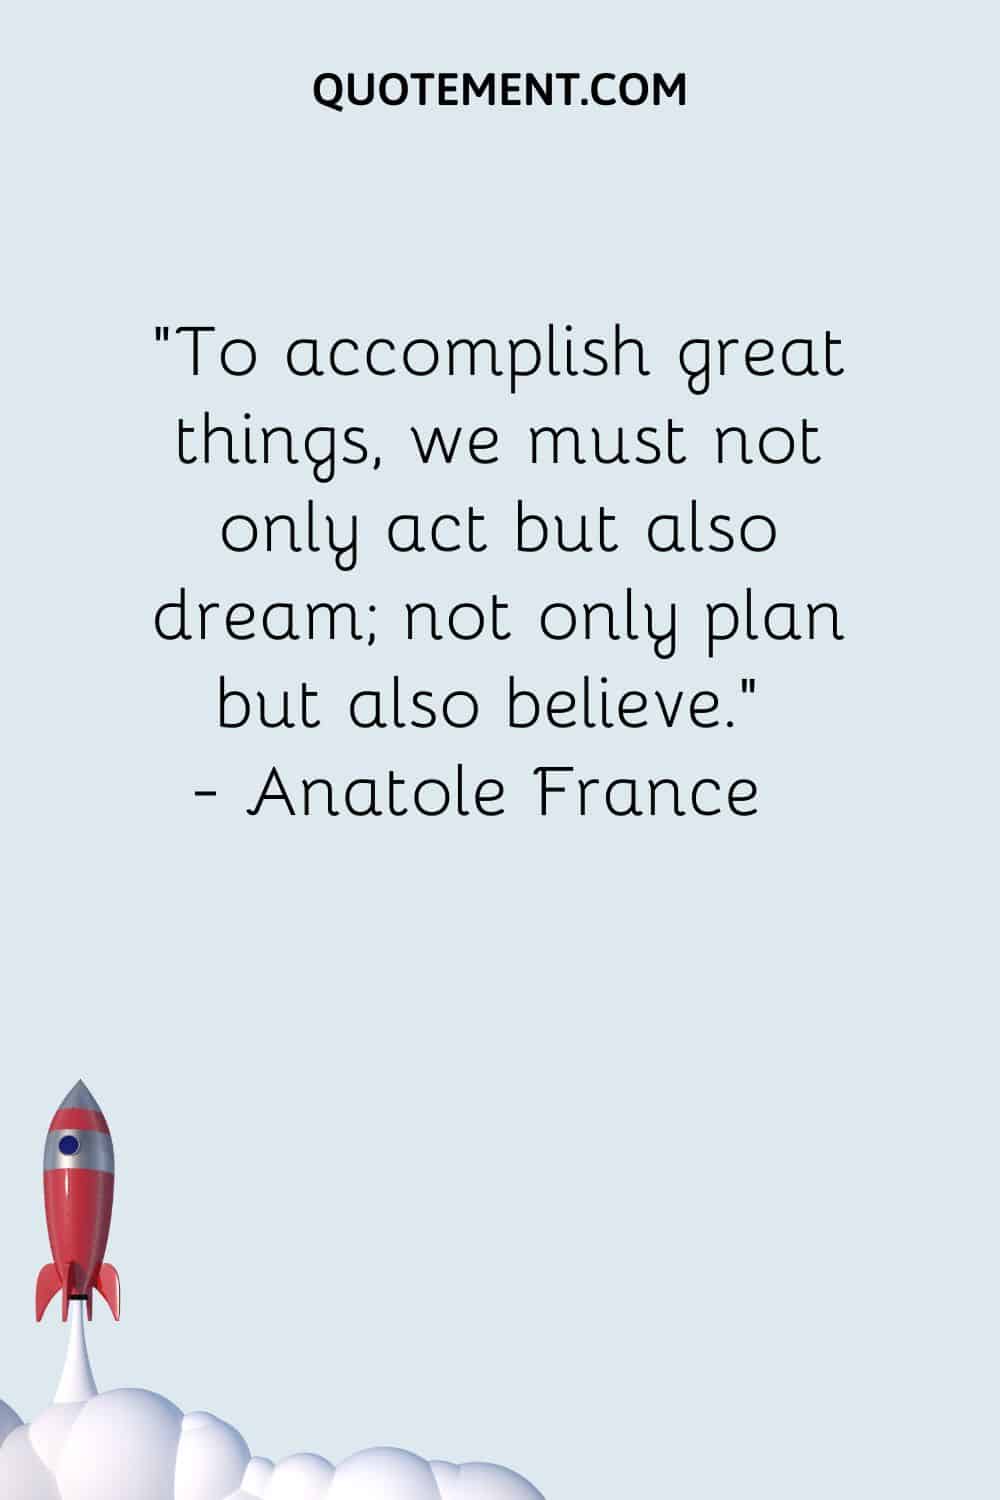 To accomplish great things, we must not only act but also dream; not only plan but also believe